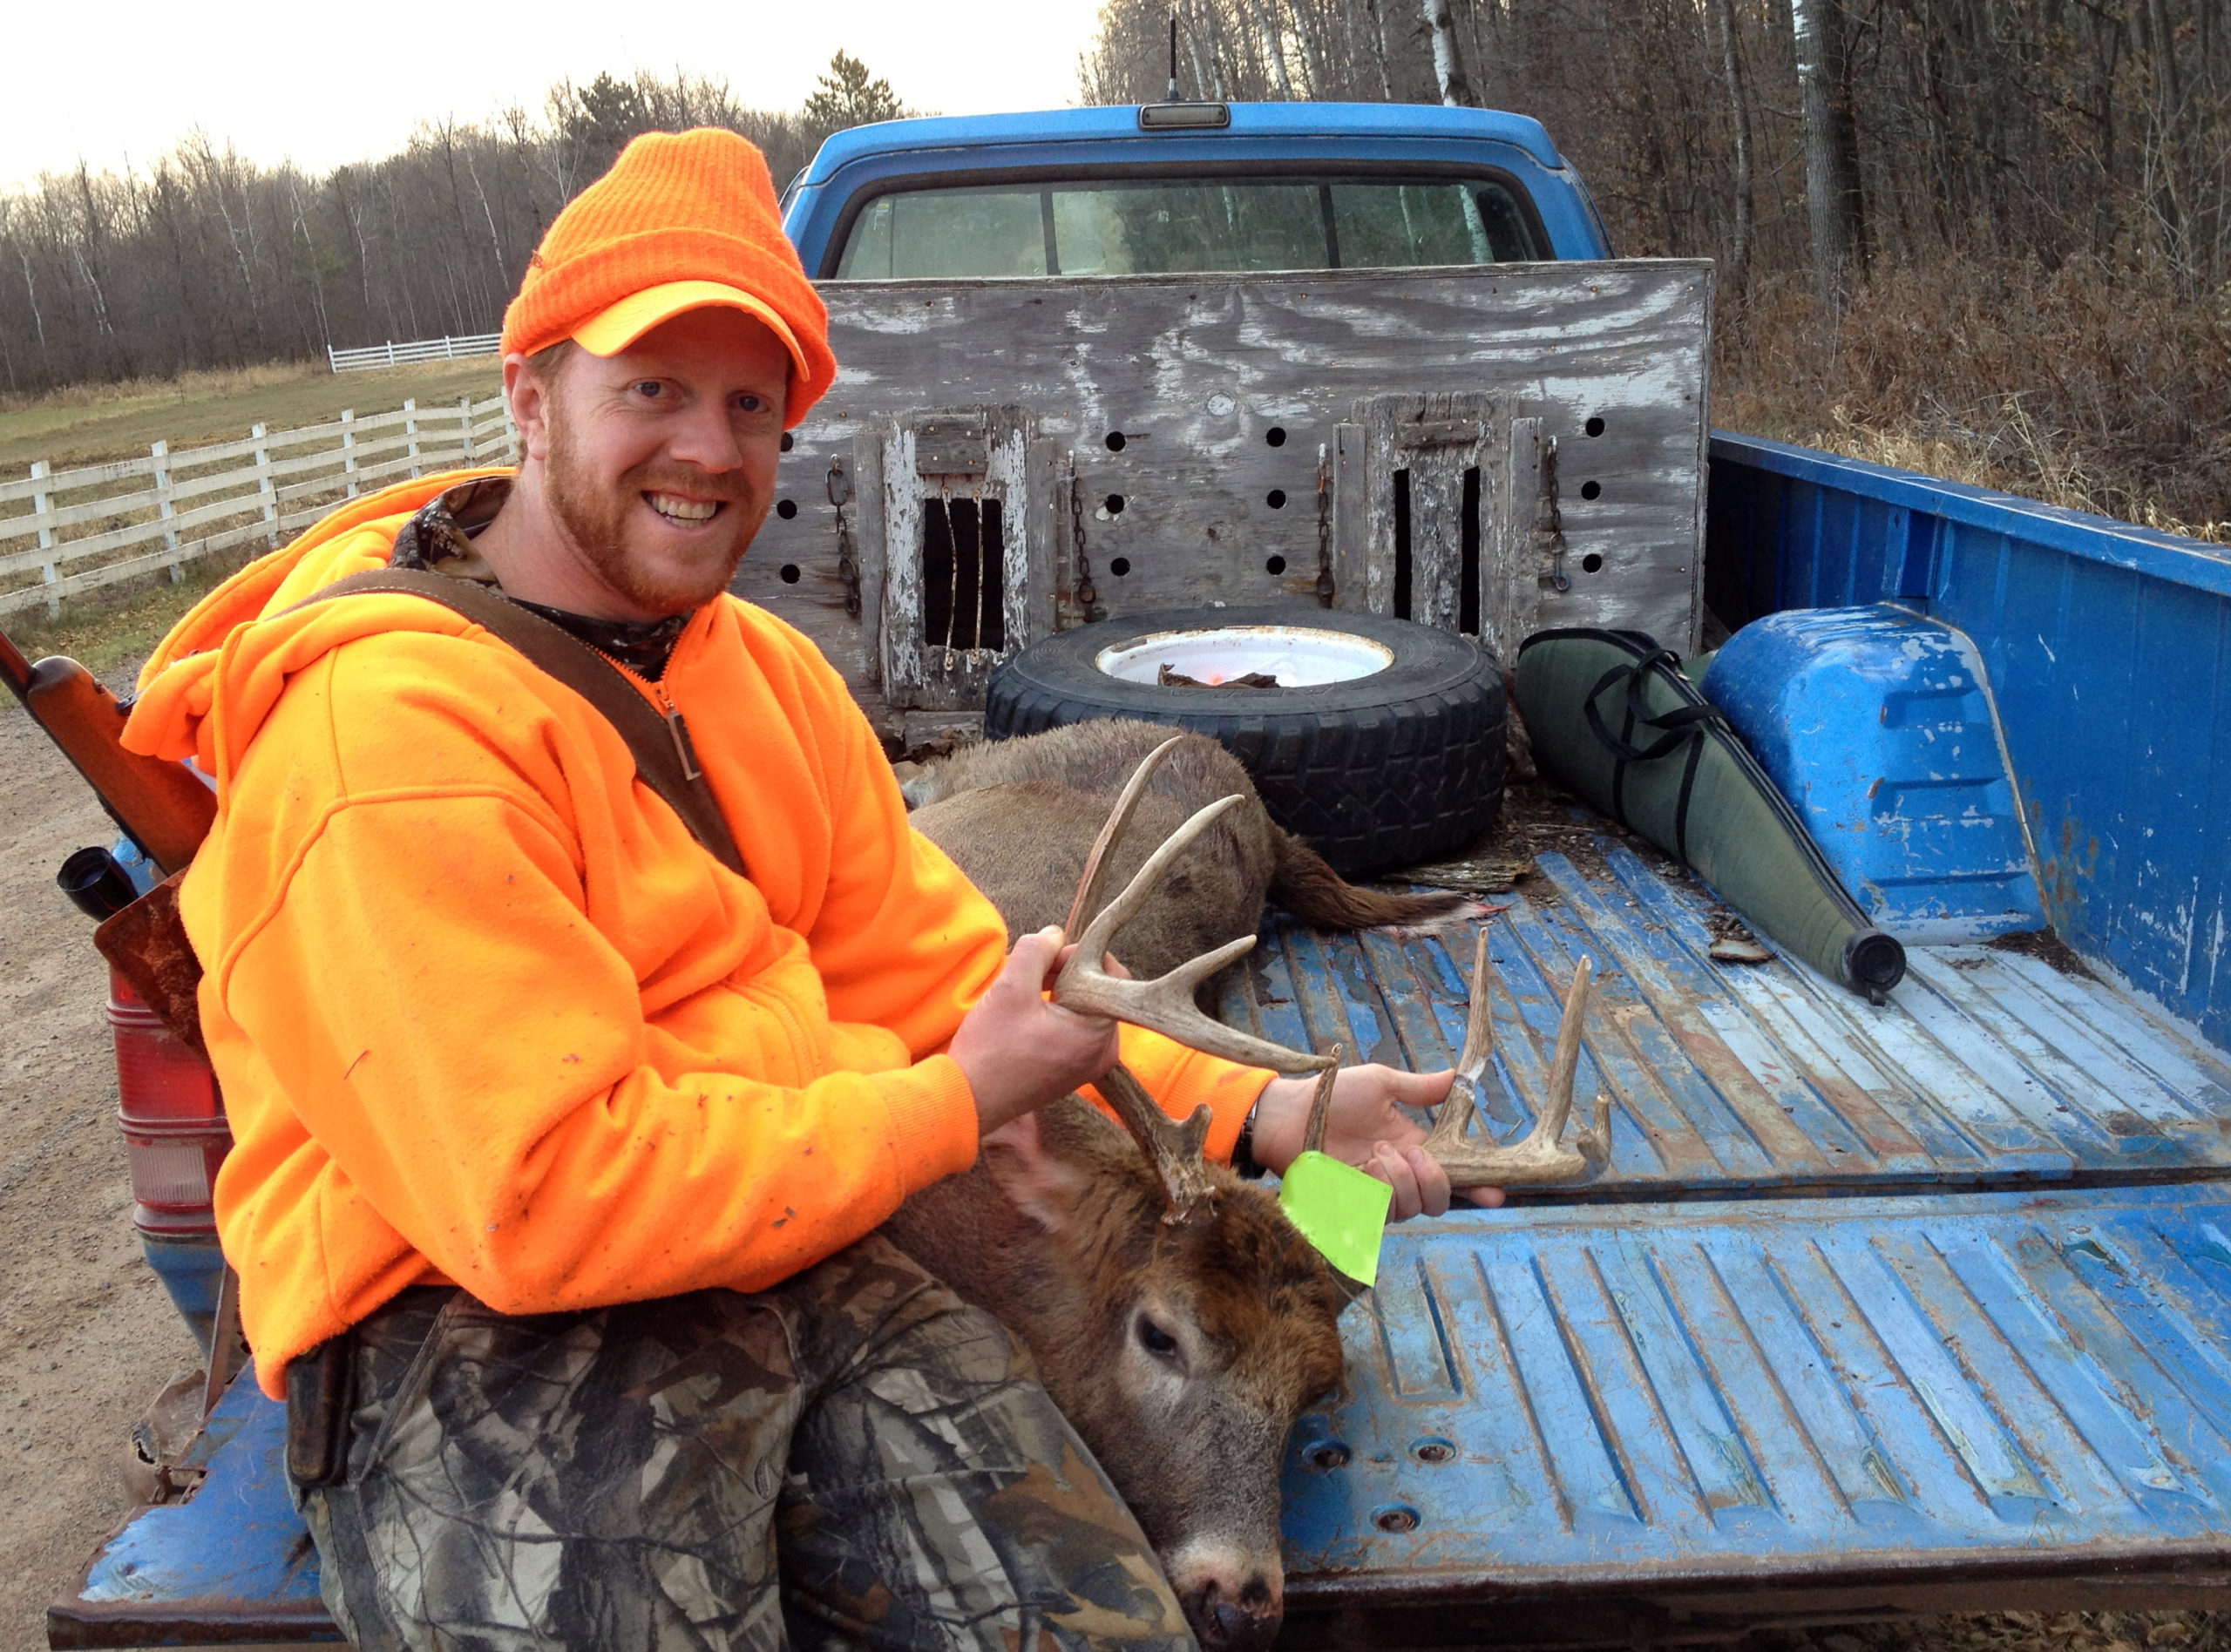 Wisconsin Deer Hunting Everything Hunters Need to Know Wide Open Spaces